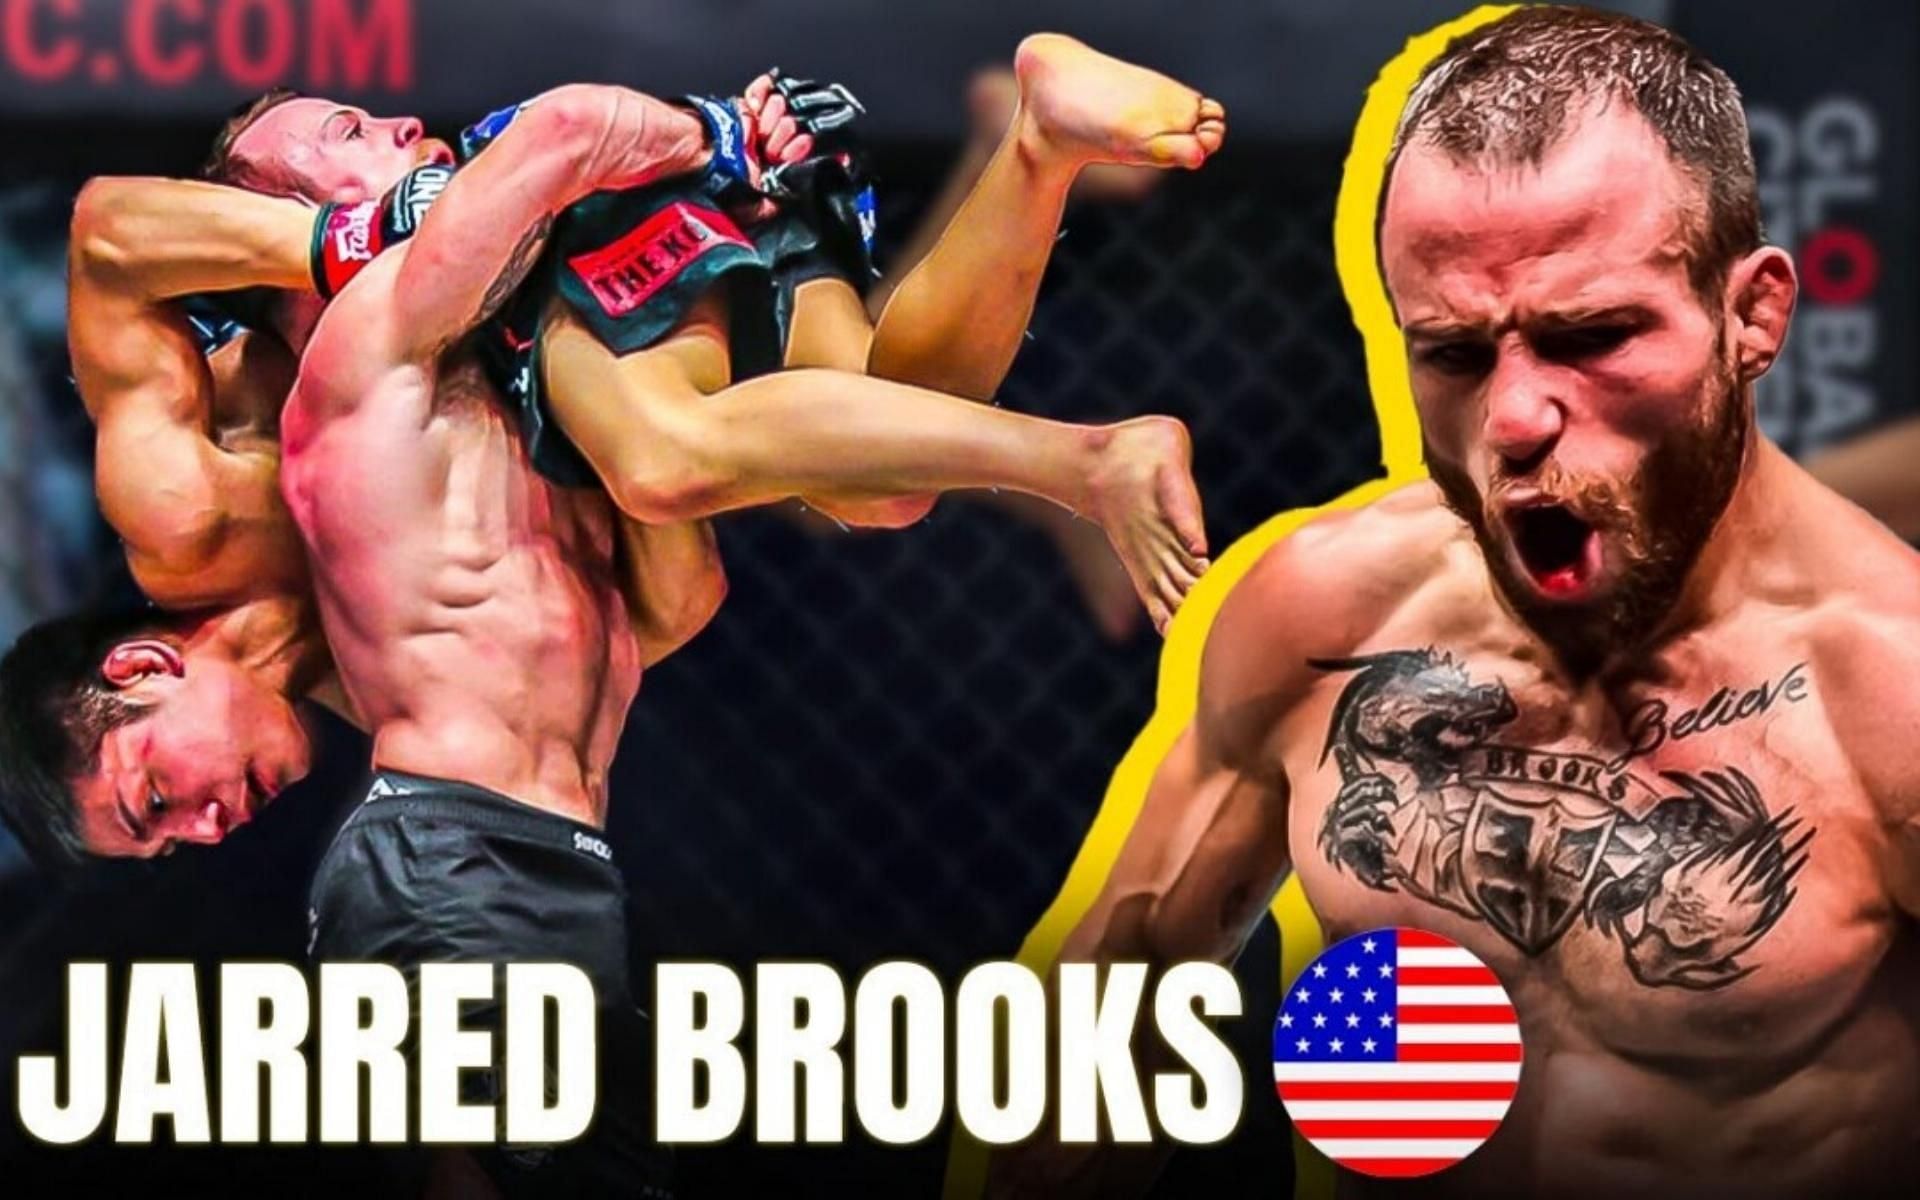 ONE Championship&#039;s Jarred Brooks is one of the most entertaining fighters active today. (Image courtesy of ONE Championship&#039;s YouTube channel)